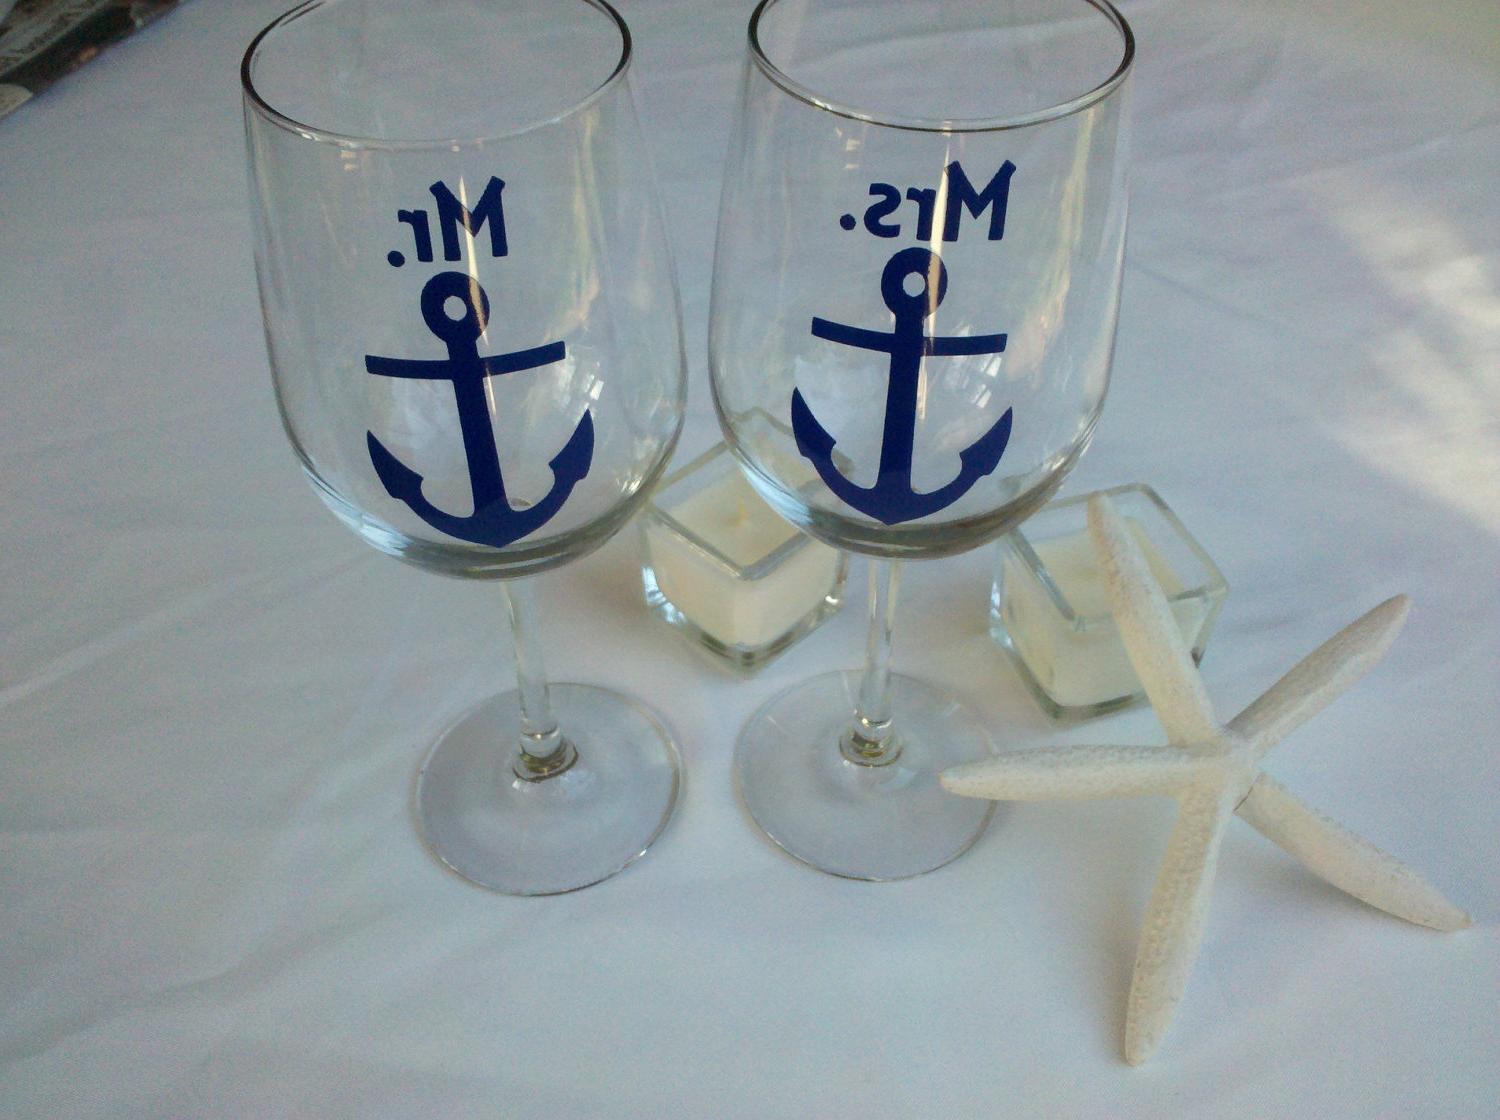 Mr. and Mrs. boat anchor wine